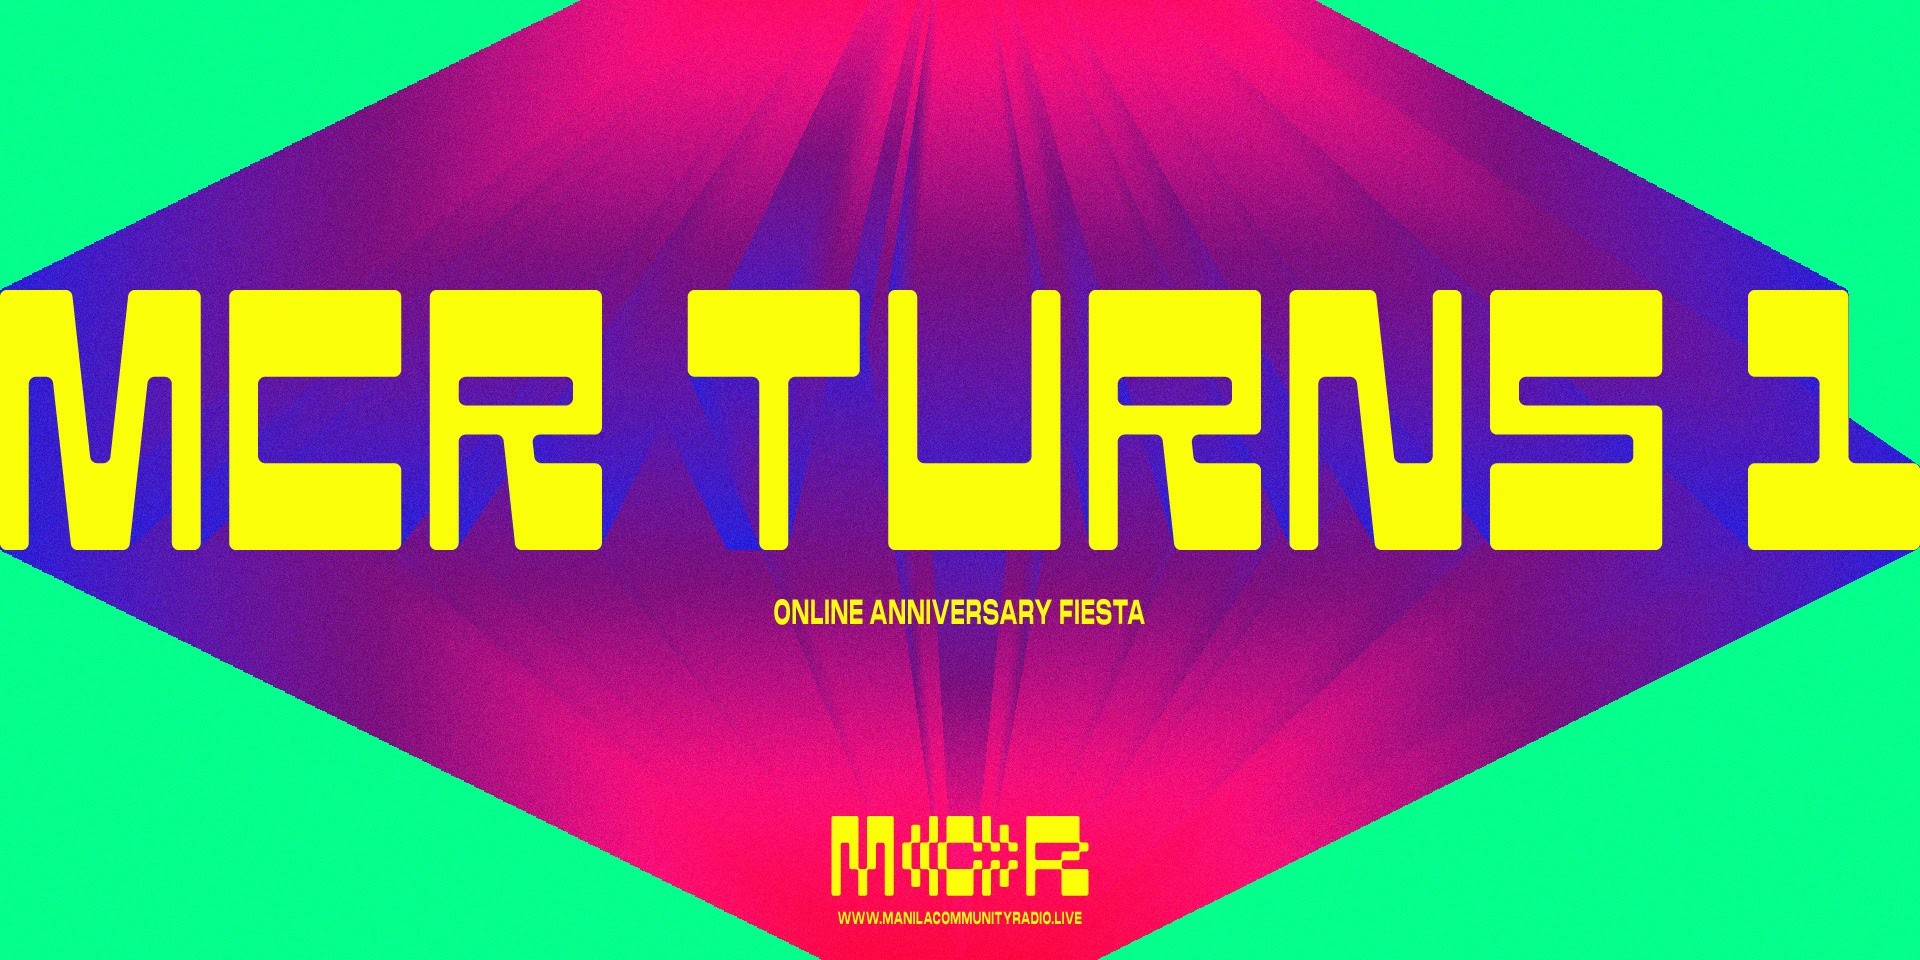 Manila Community Radio celebrates its first anniversary with online ‘fiesta’ featuring BuwanBuwan Collective, UNKNWN, Raymund Marasigan, and more